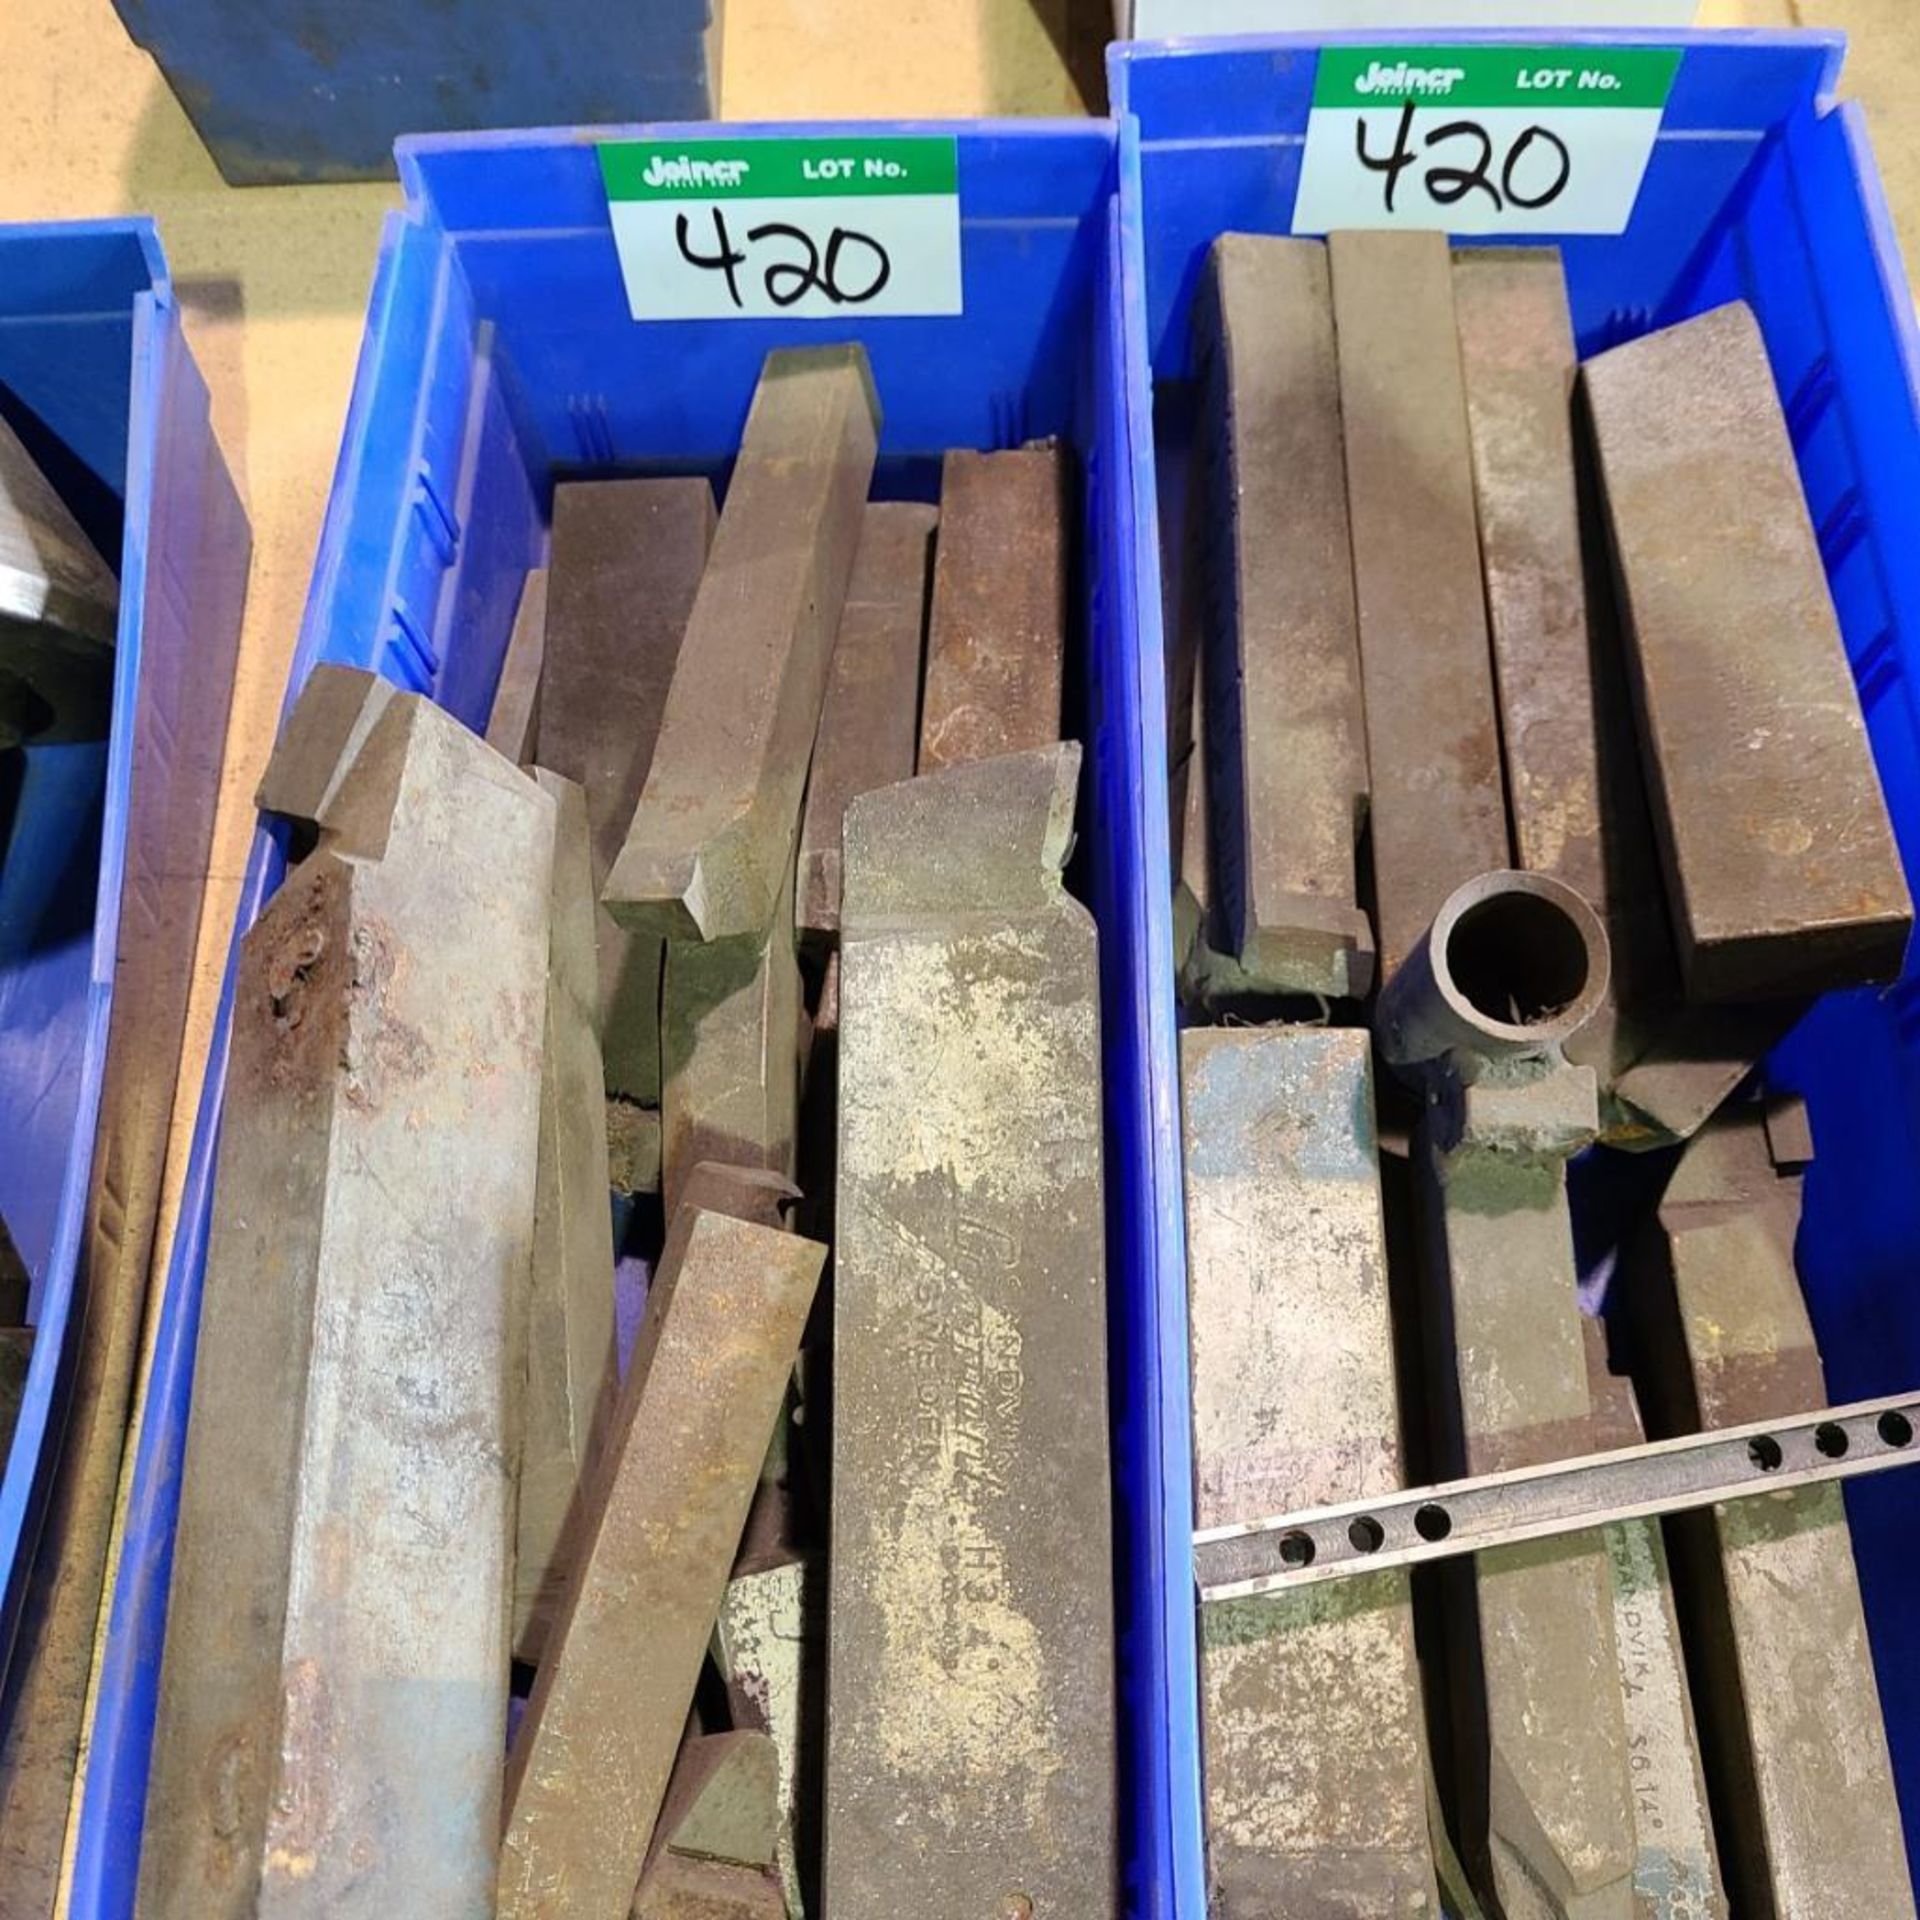 2 BOXES OF CEMENTED CARBIDE LATHE CUTTERS - Image 2 of 2